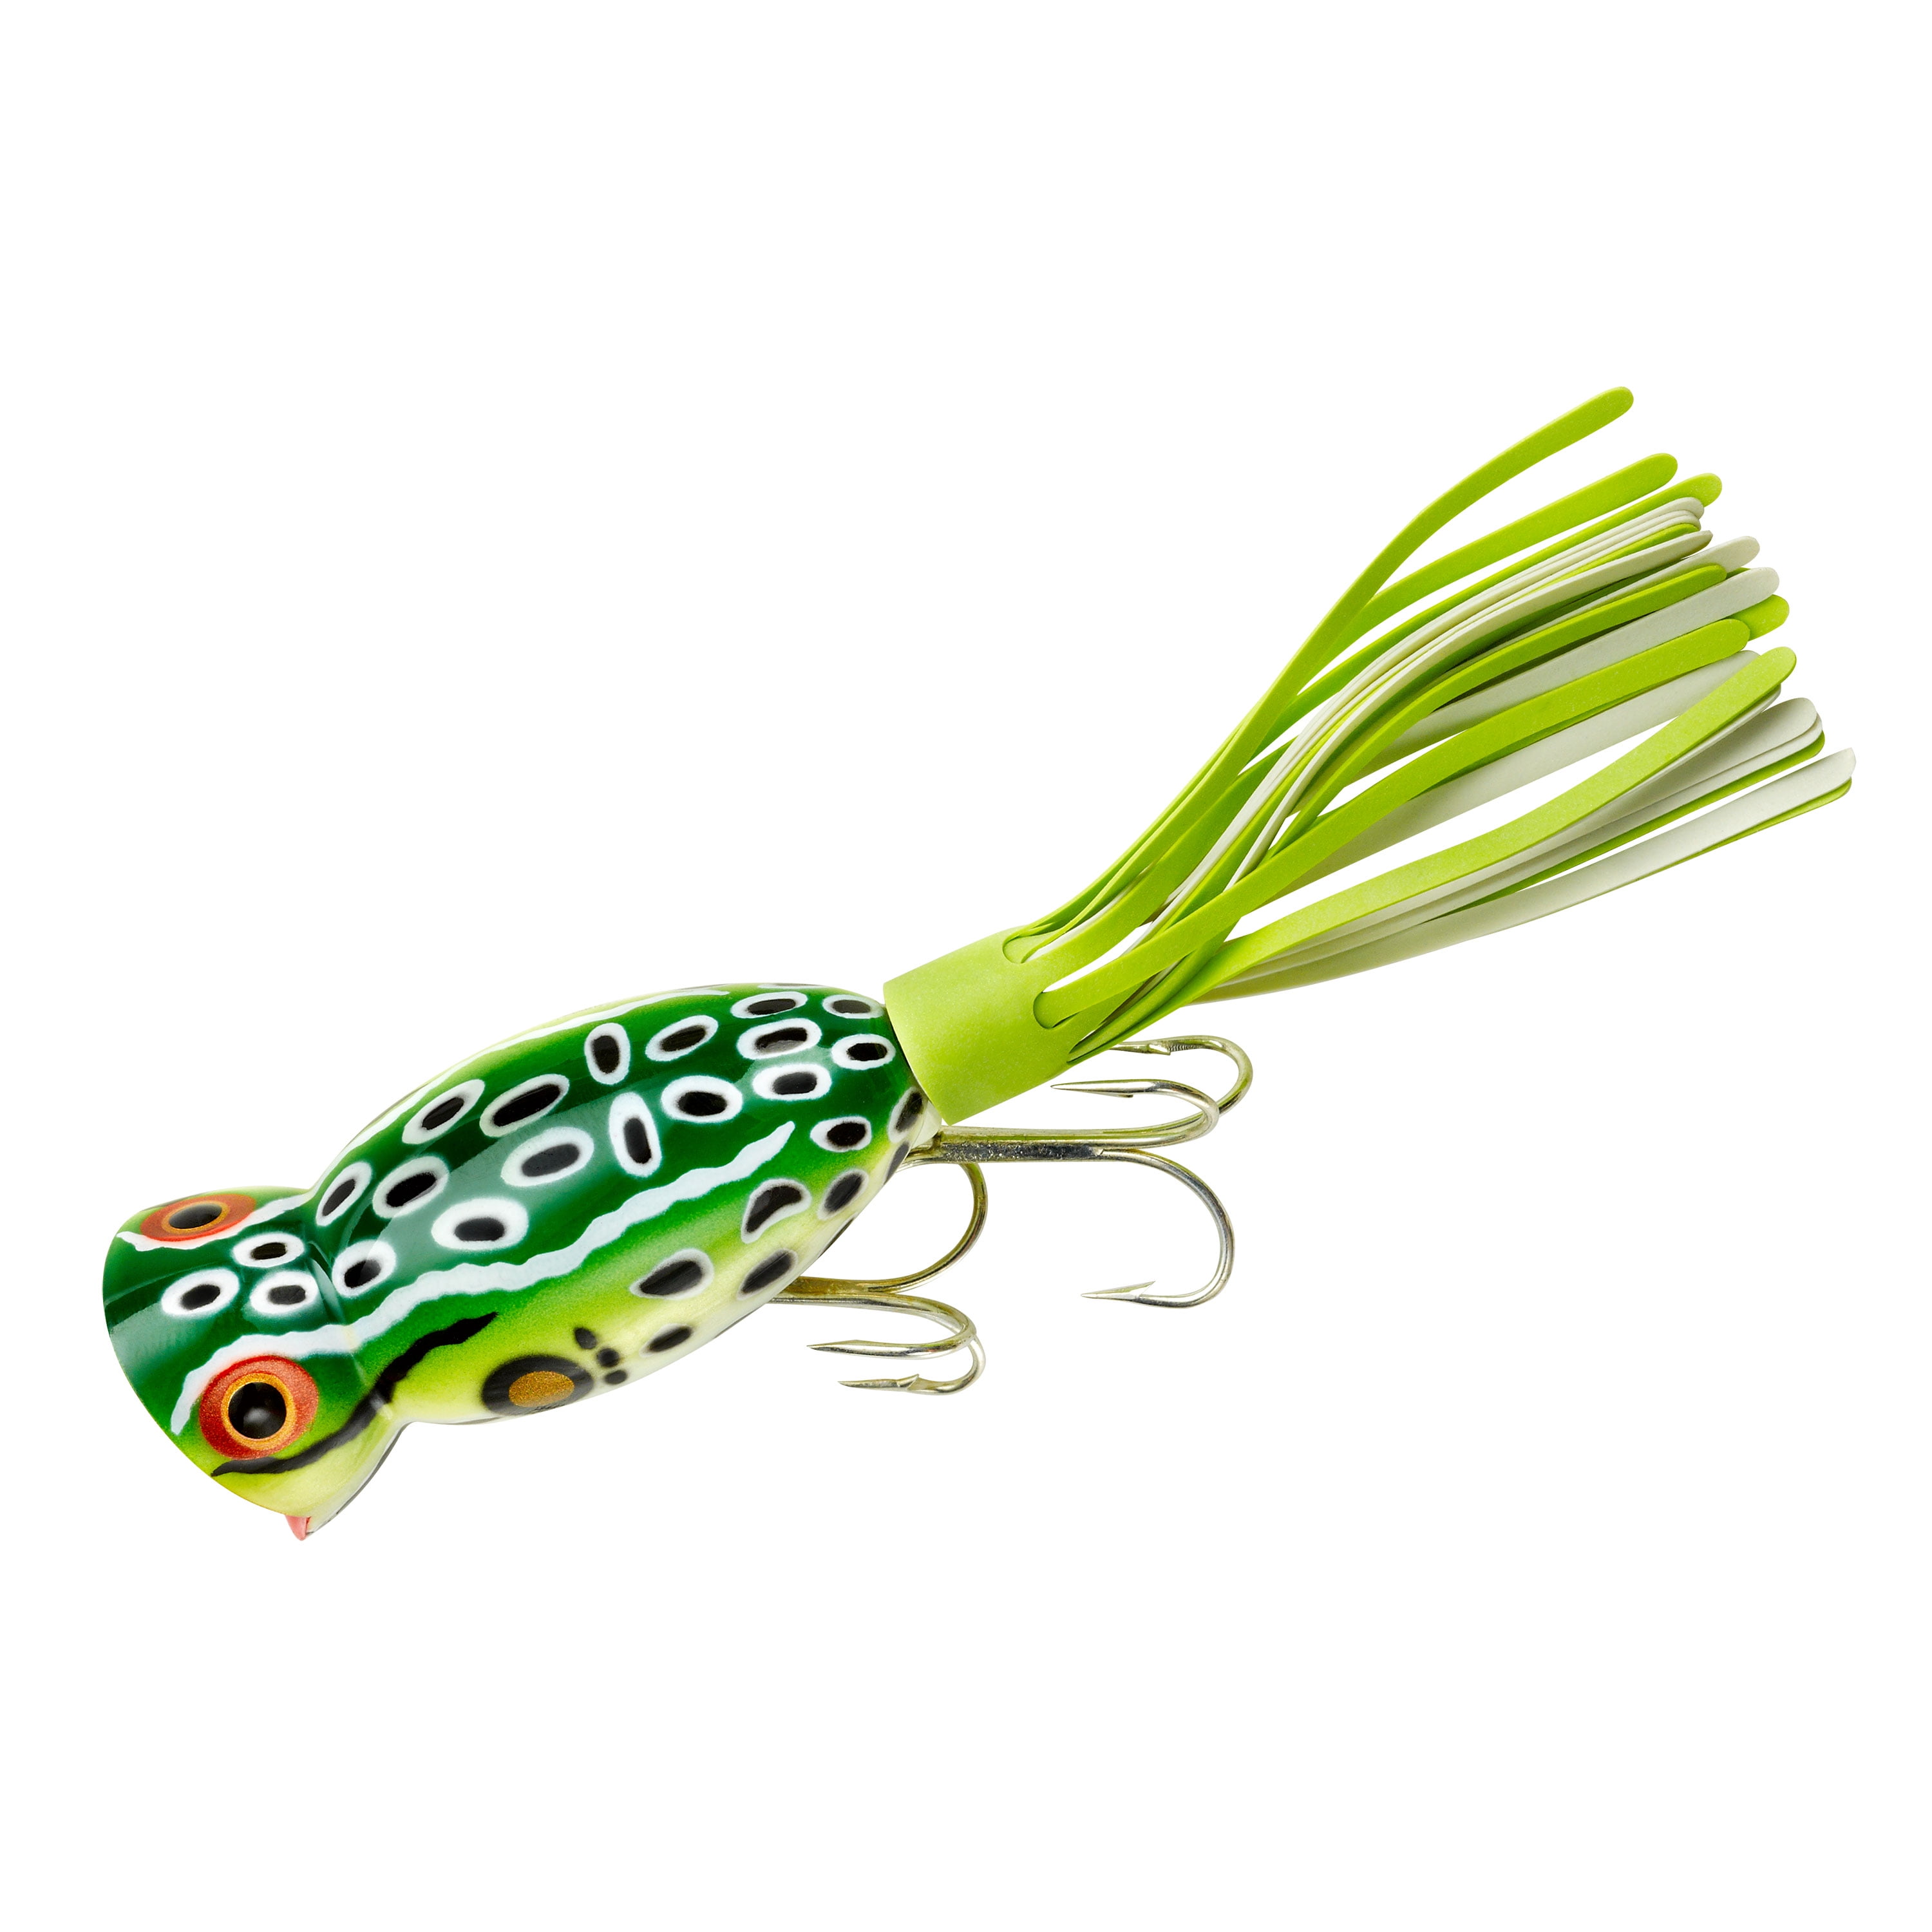  Arbogast Hula Popper Topwater Fishing Lure, White/Red Head,  G750 (2 1/4 in, 5/8 oz) : Fishing Topwater Lures And Crankbaits : Sports &  Outdoors